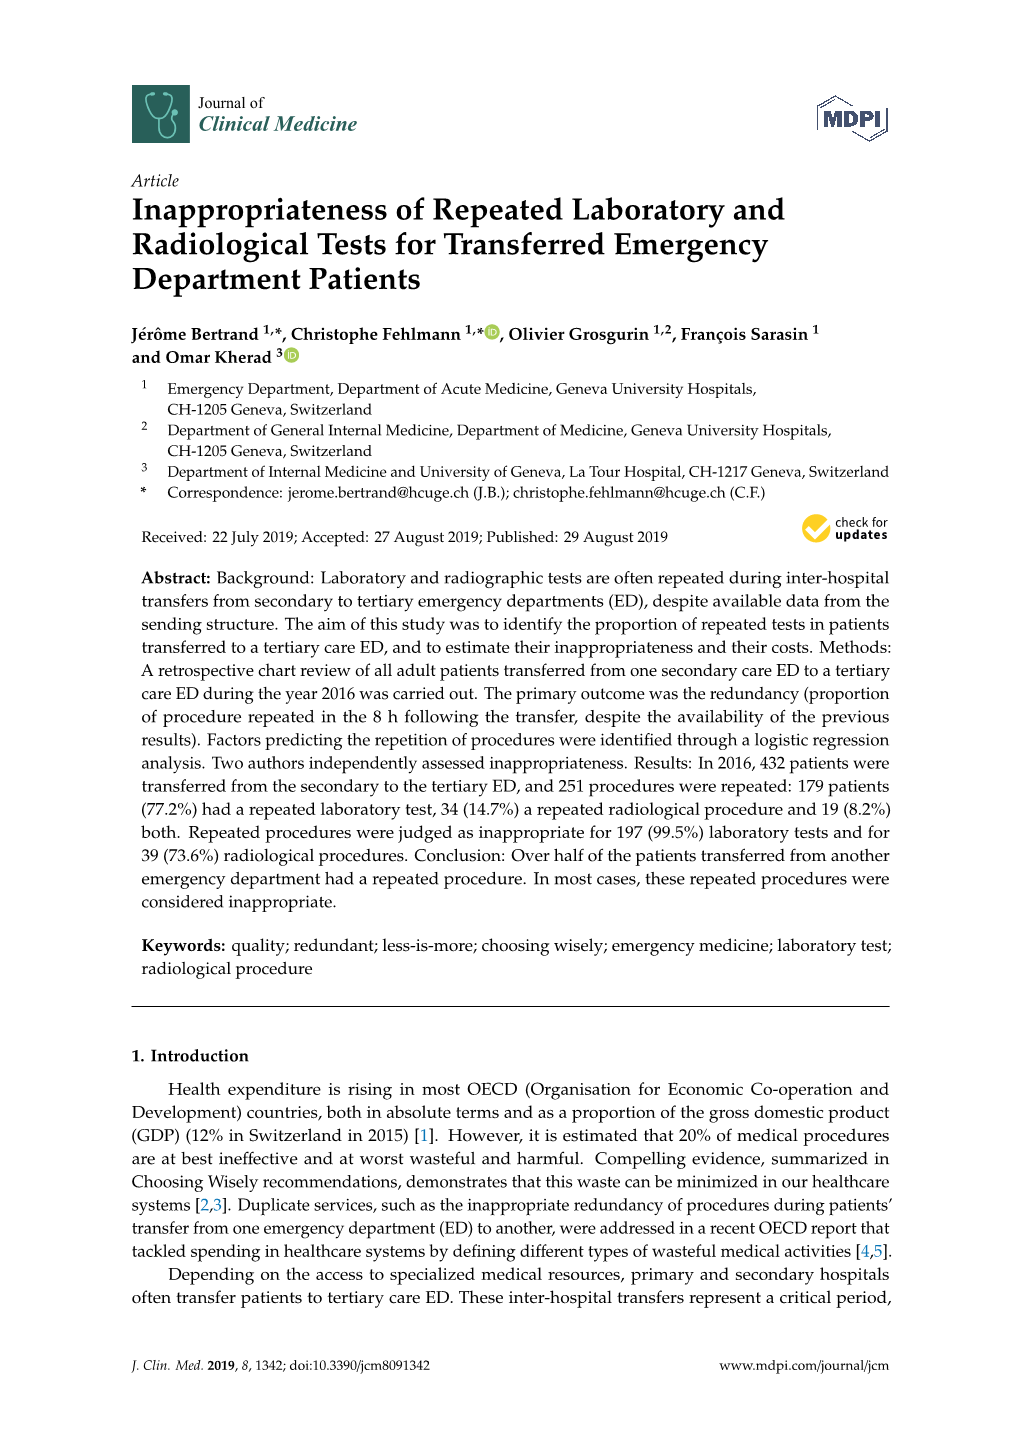 Inappropriateness of Repeated Laboratory and Radiological Tests for Transferred Emergency Department Patients